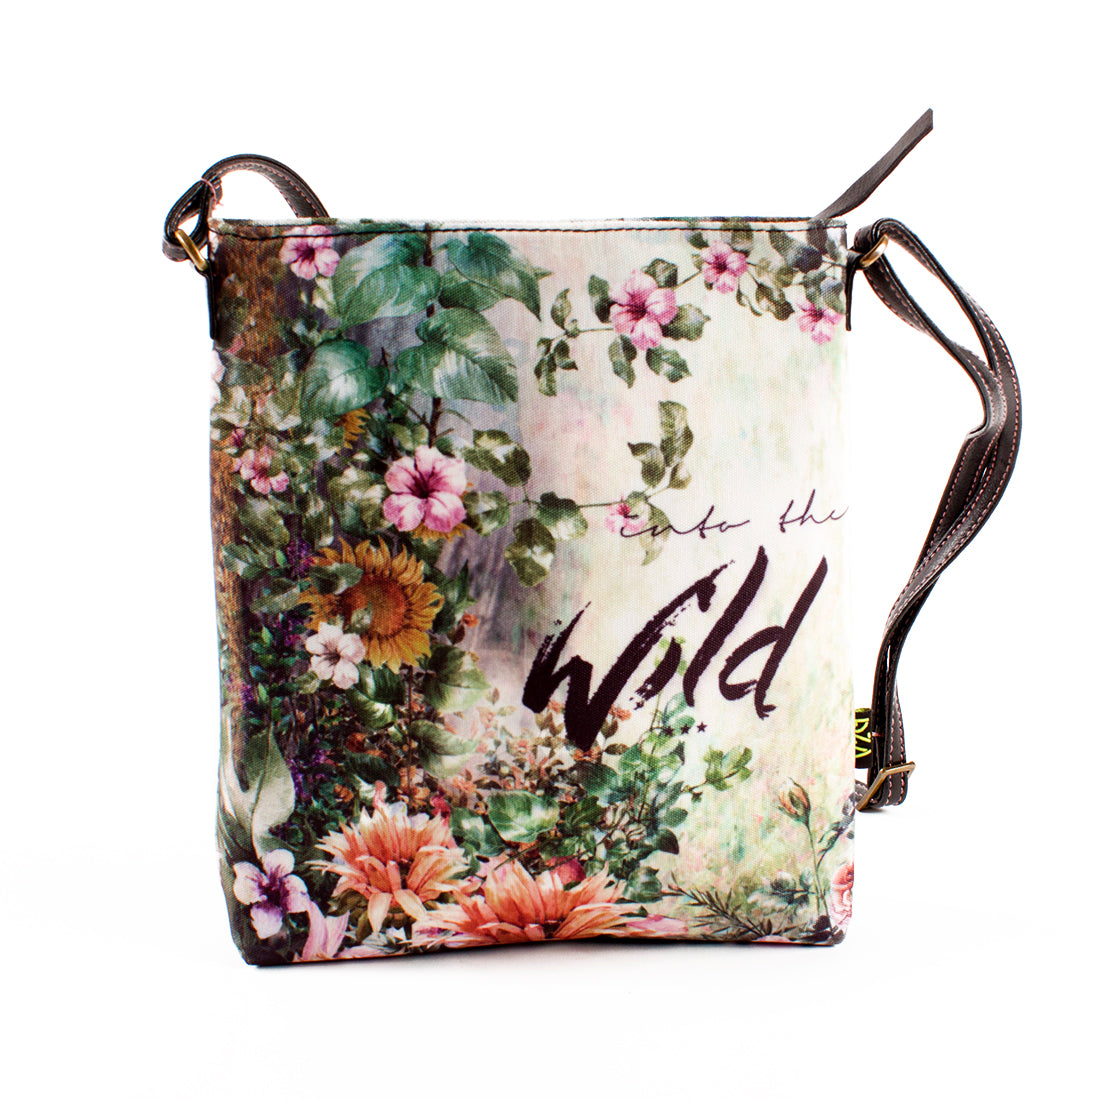 Sling Bag - Into the Wild